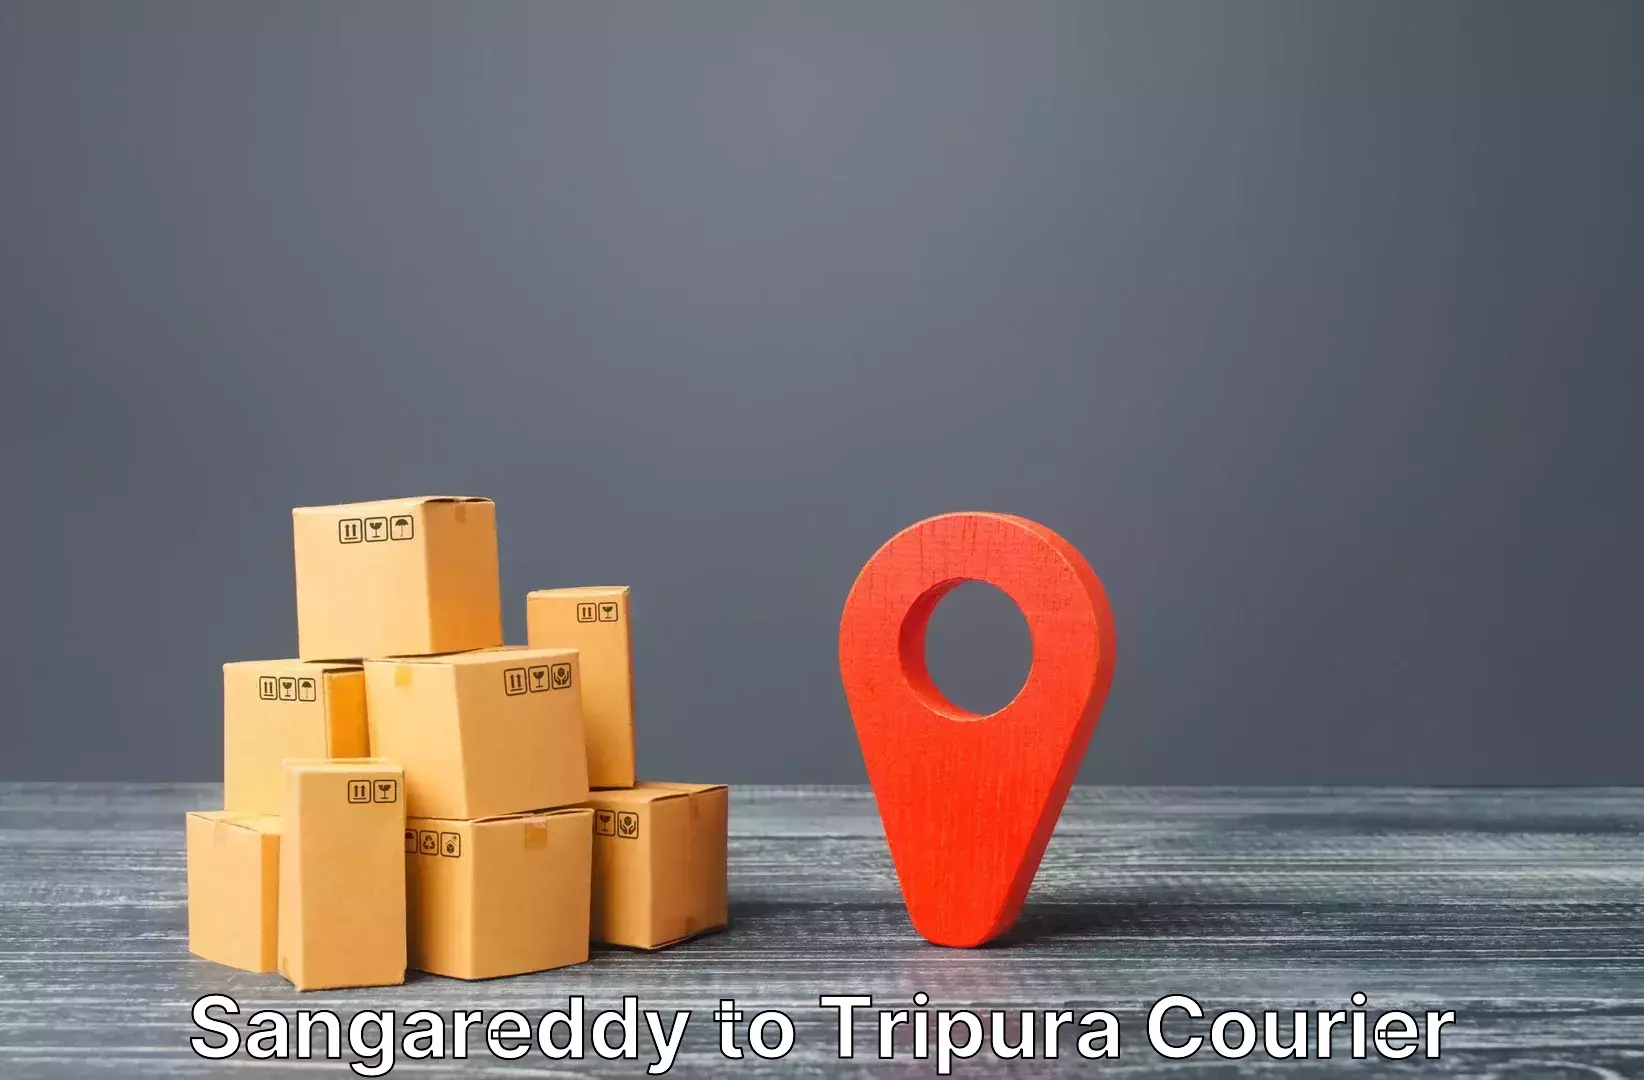 Baggage delivery planning in Sangareddy to Udaipur Tripura